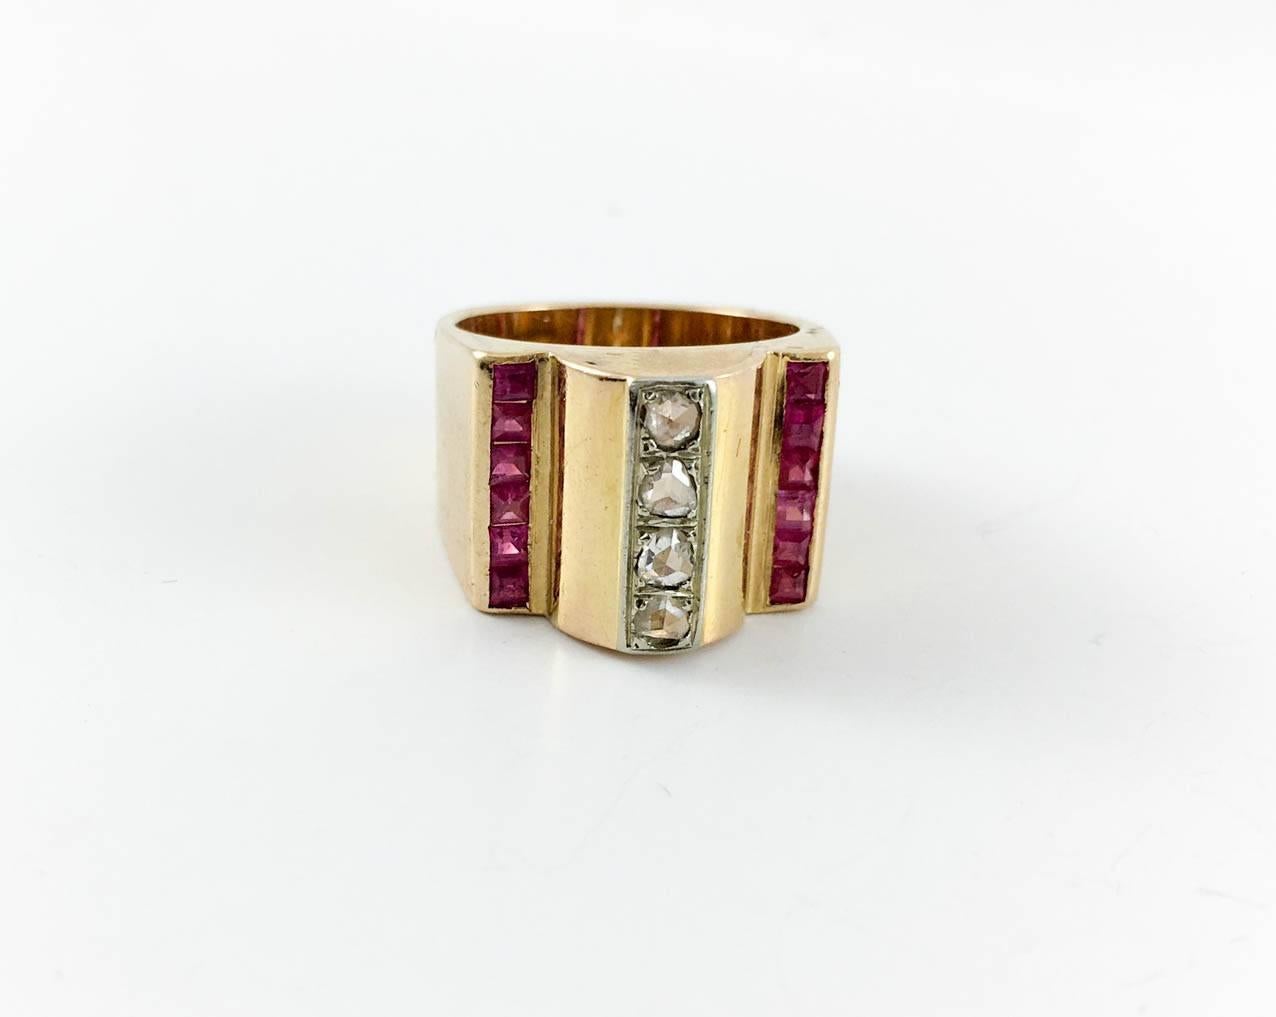 Stylish Vintage Cocktail Ring. This ring has a strong design with old cut diamonds and synthetic rubies. It is a large ring in typical 1940s style. It will certainly bring a bit of old glamour to any look. Hallmarked.
Period: 1940s

Origin: